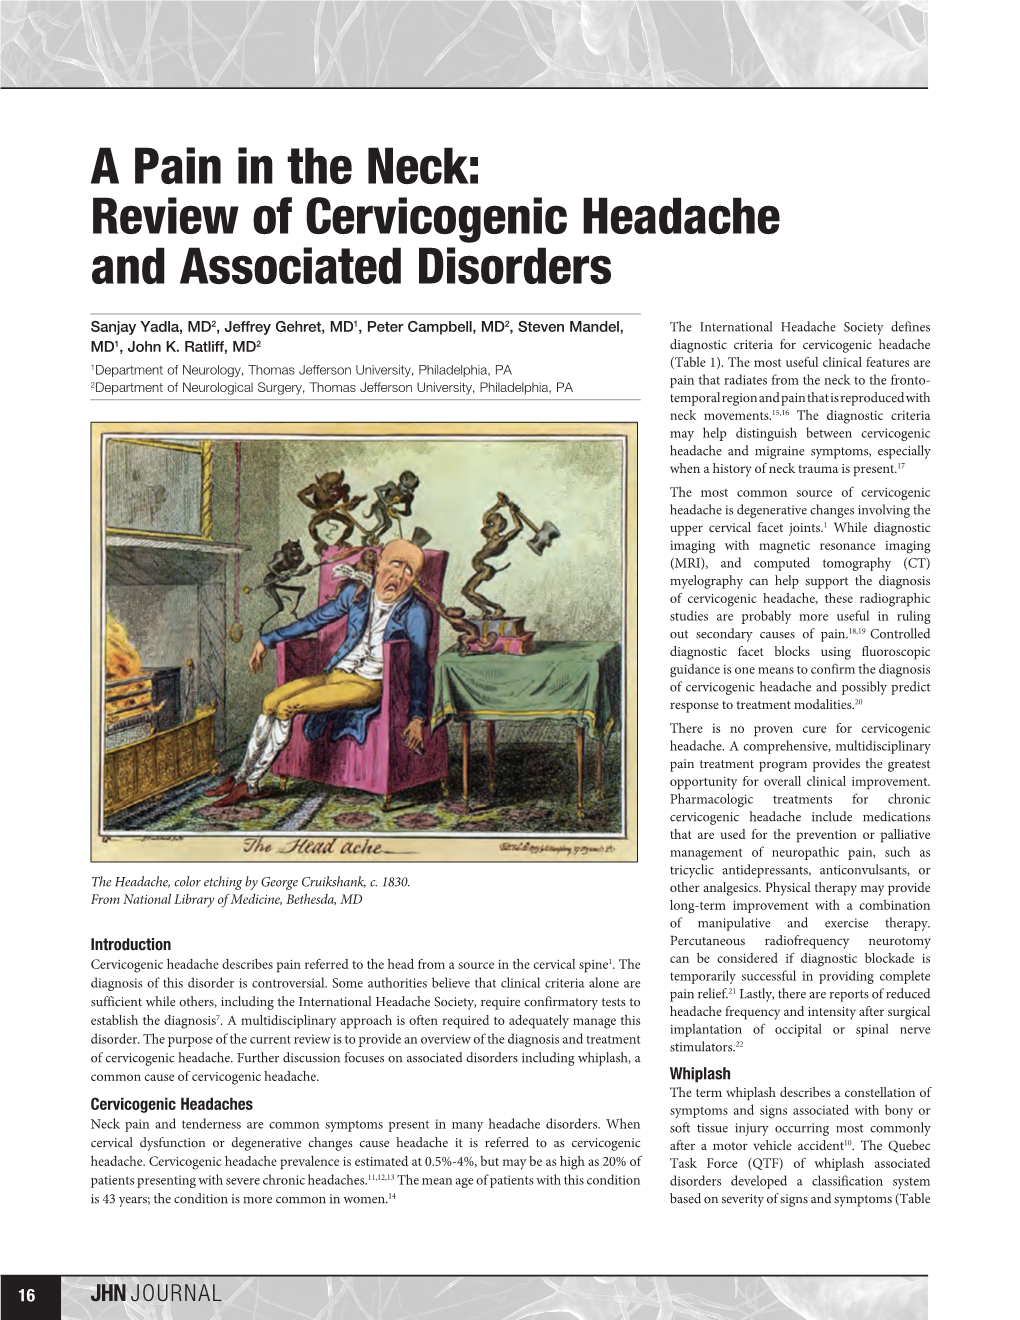 A Pain in the Neck: Review of Cervicogenic Headache and Associated Disorders